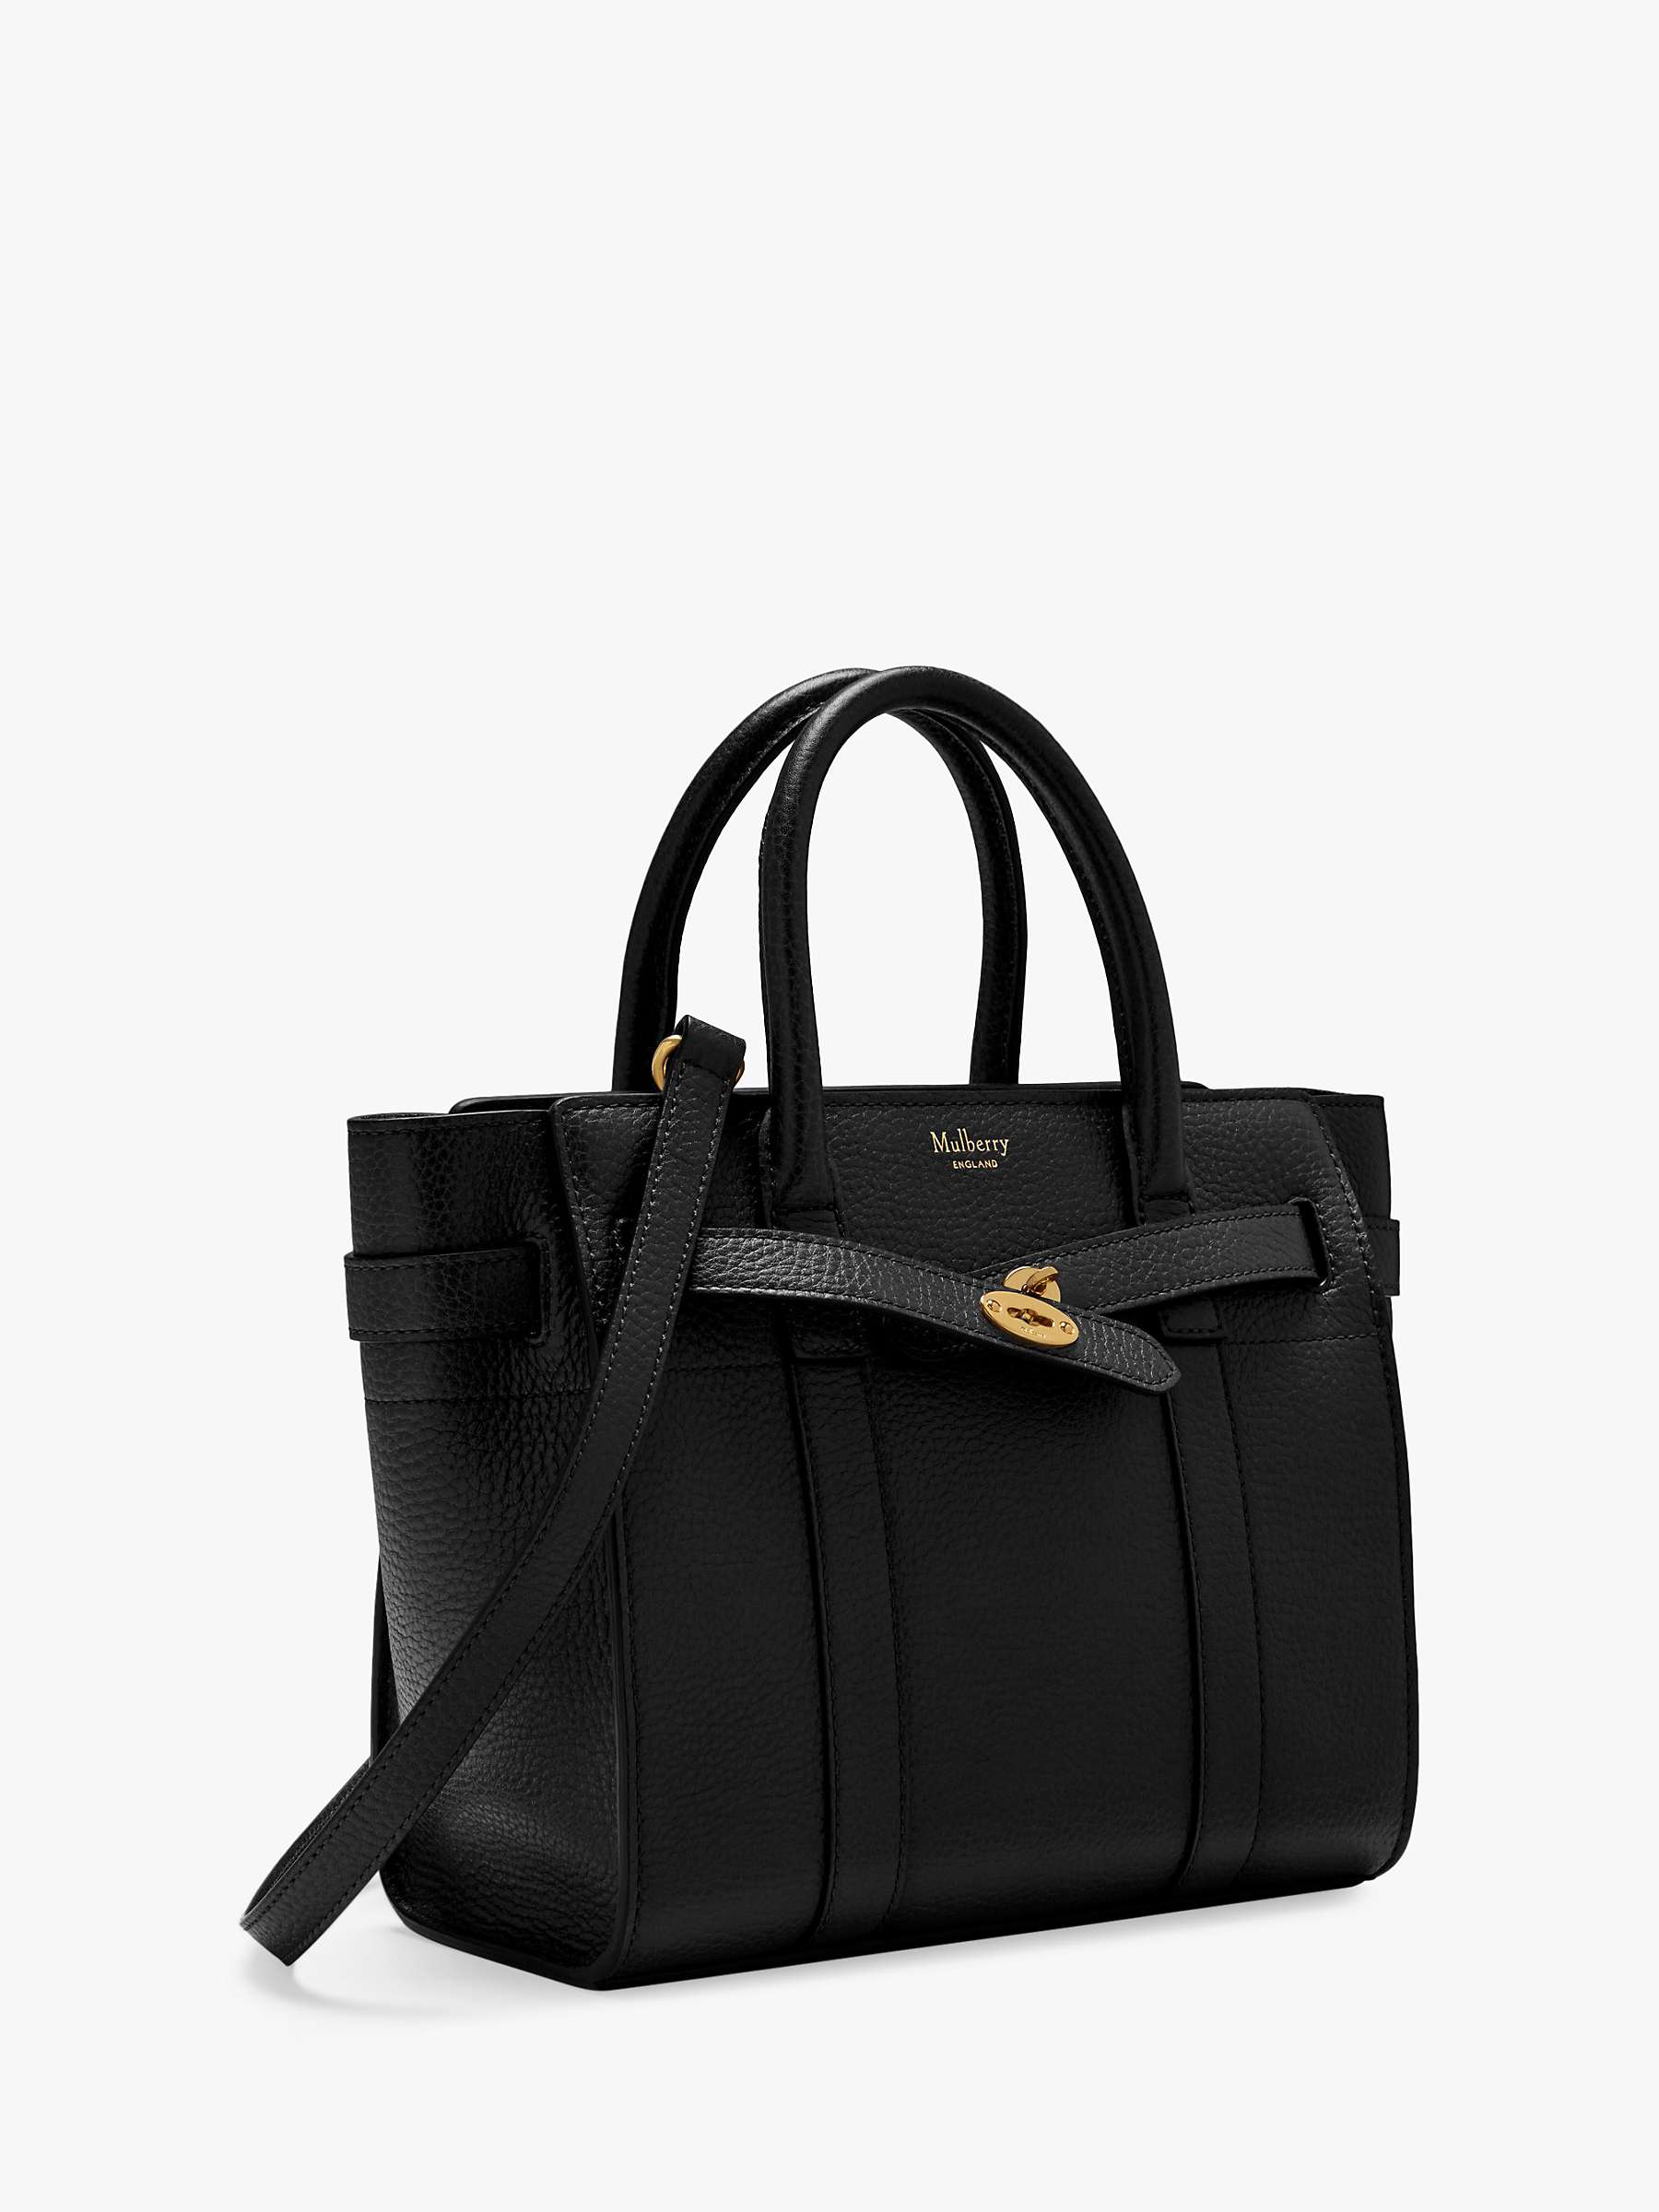 Buy Mulberry Mini Bayswater Zipped Classic Grain Leather Tote Bag Online at johnlewis.com